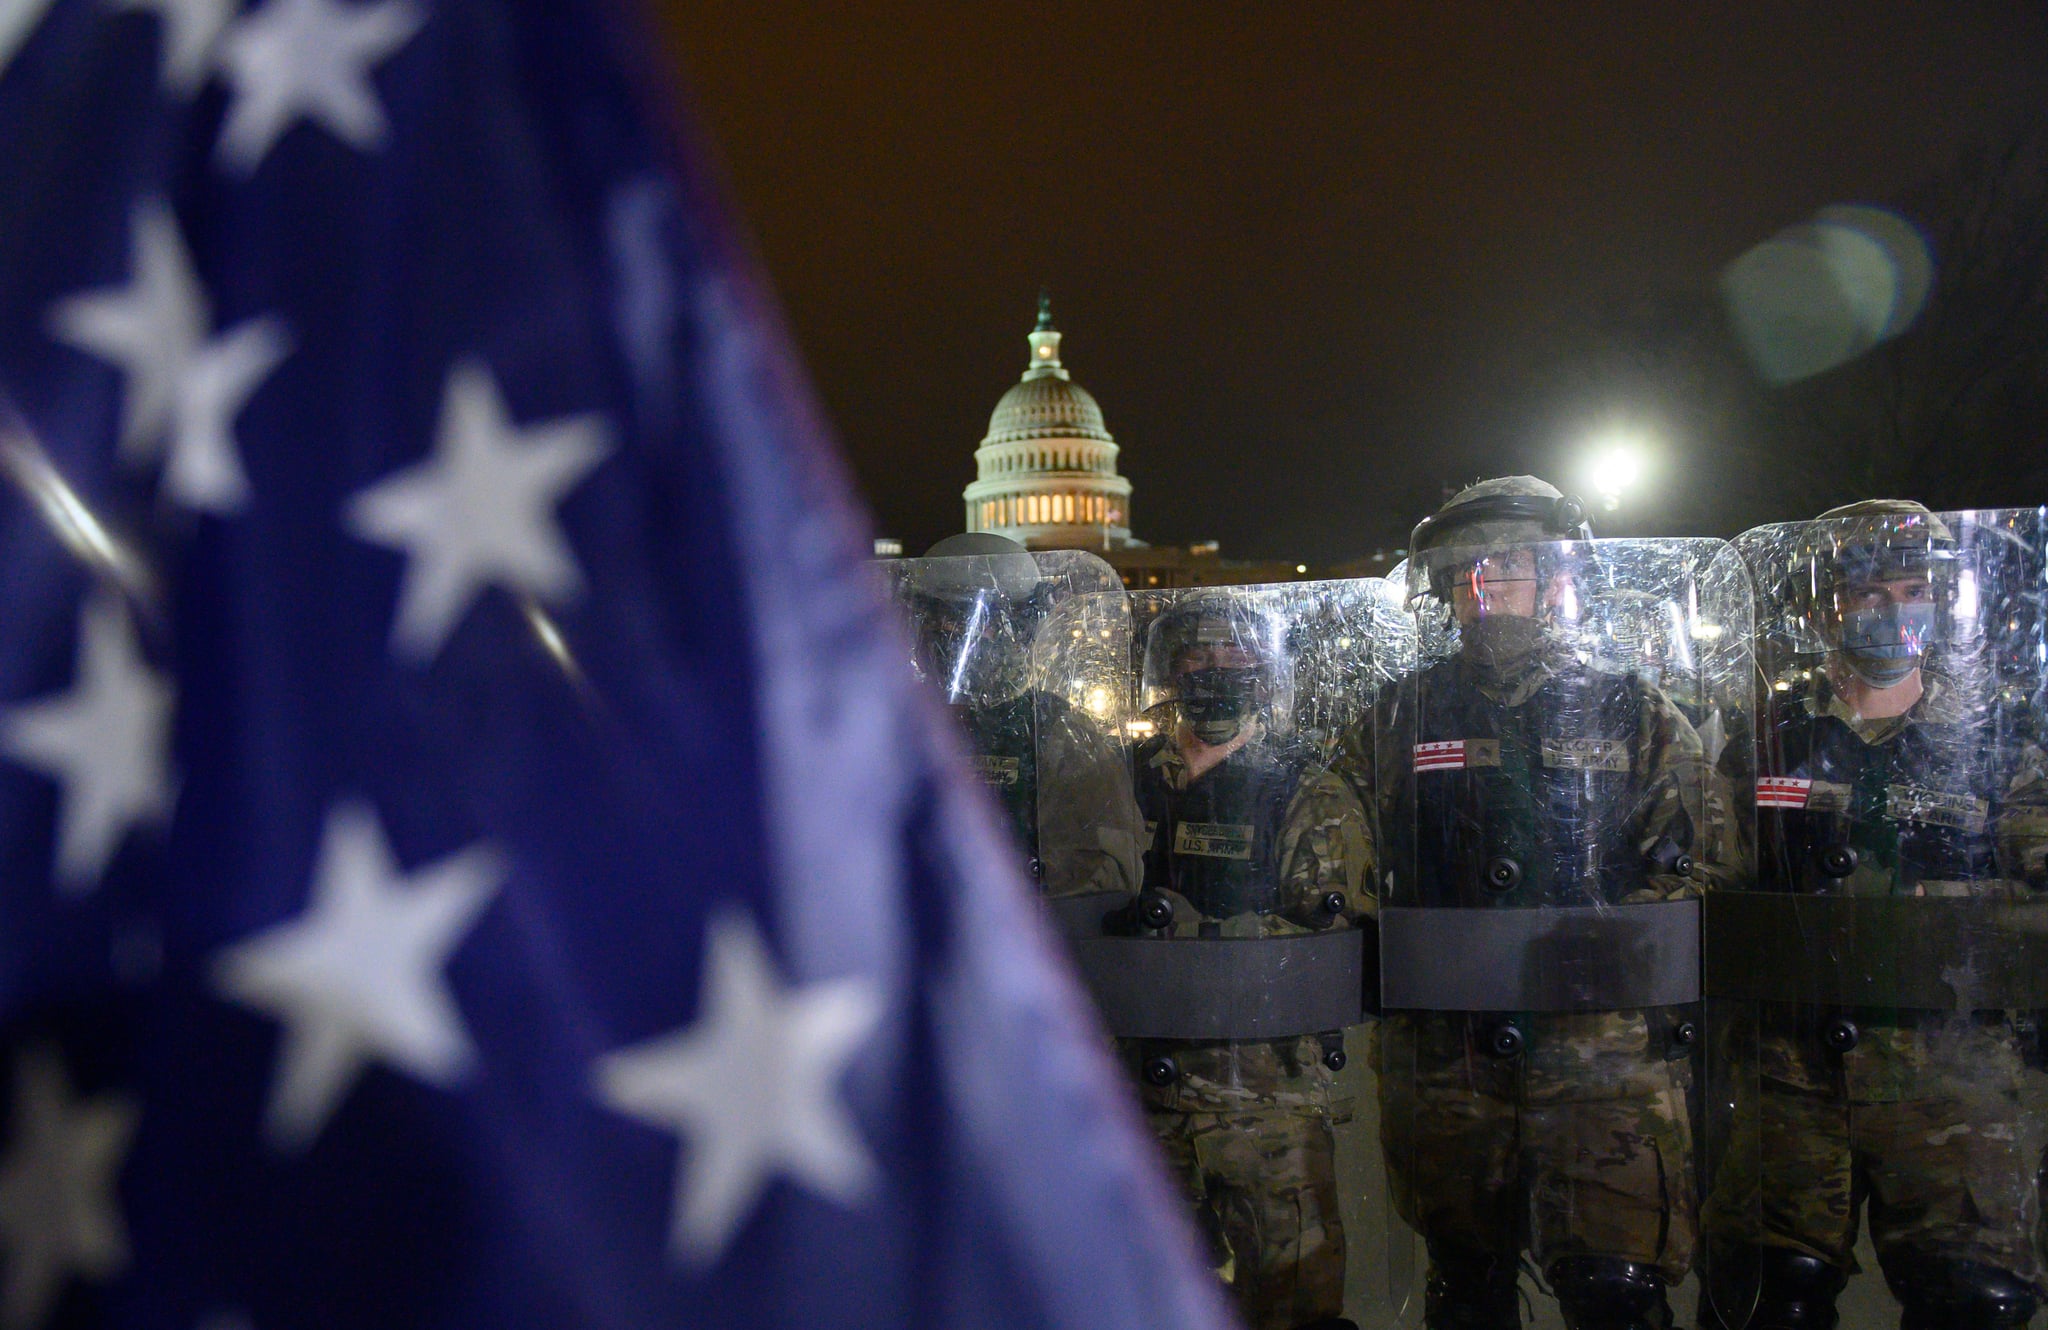 Members of the DC National Guard are deployed outside of the US Capitol in Washington DC on January 6, 2021. - Trump supporters remain outside, defying a 6.00 pm (2300 GMT) curfew imposed across the city by Mayor Muriel Bowser.Donald Trump's supporters stormed a session of Congress held today, January 6, to certify Joe Biden's election win, triggering unprecedented chaos and violence at the heart of American democracy and accusations the president was attempting a coup. (Photo by Andrew CABALLERO-REYNOLDS / AFP) (Photo by ANDREW CABALLERO-REYNOLDS/AFP via Getty Images)